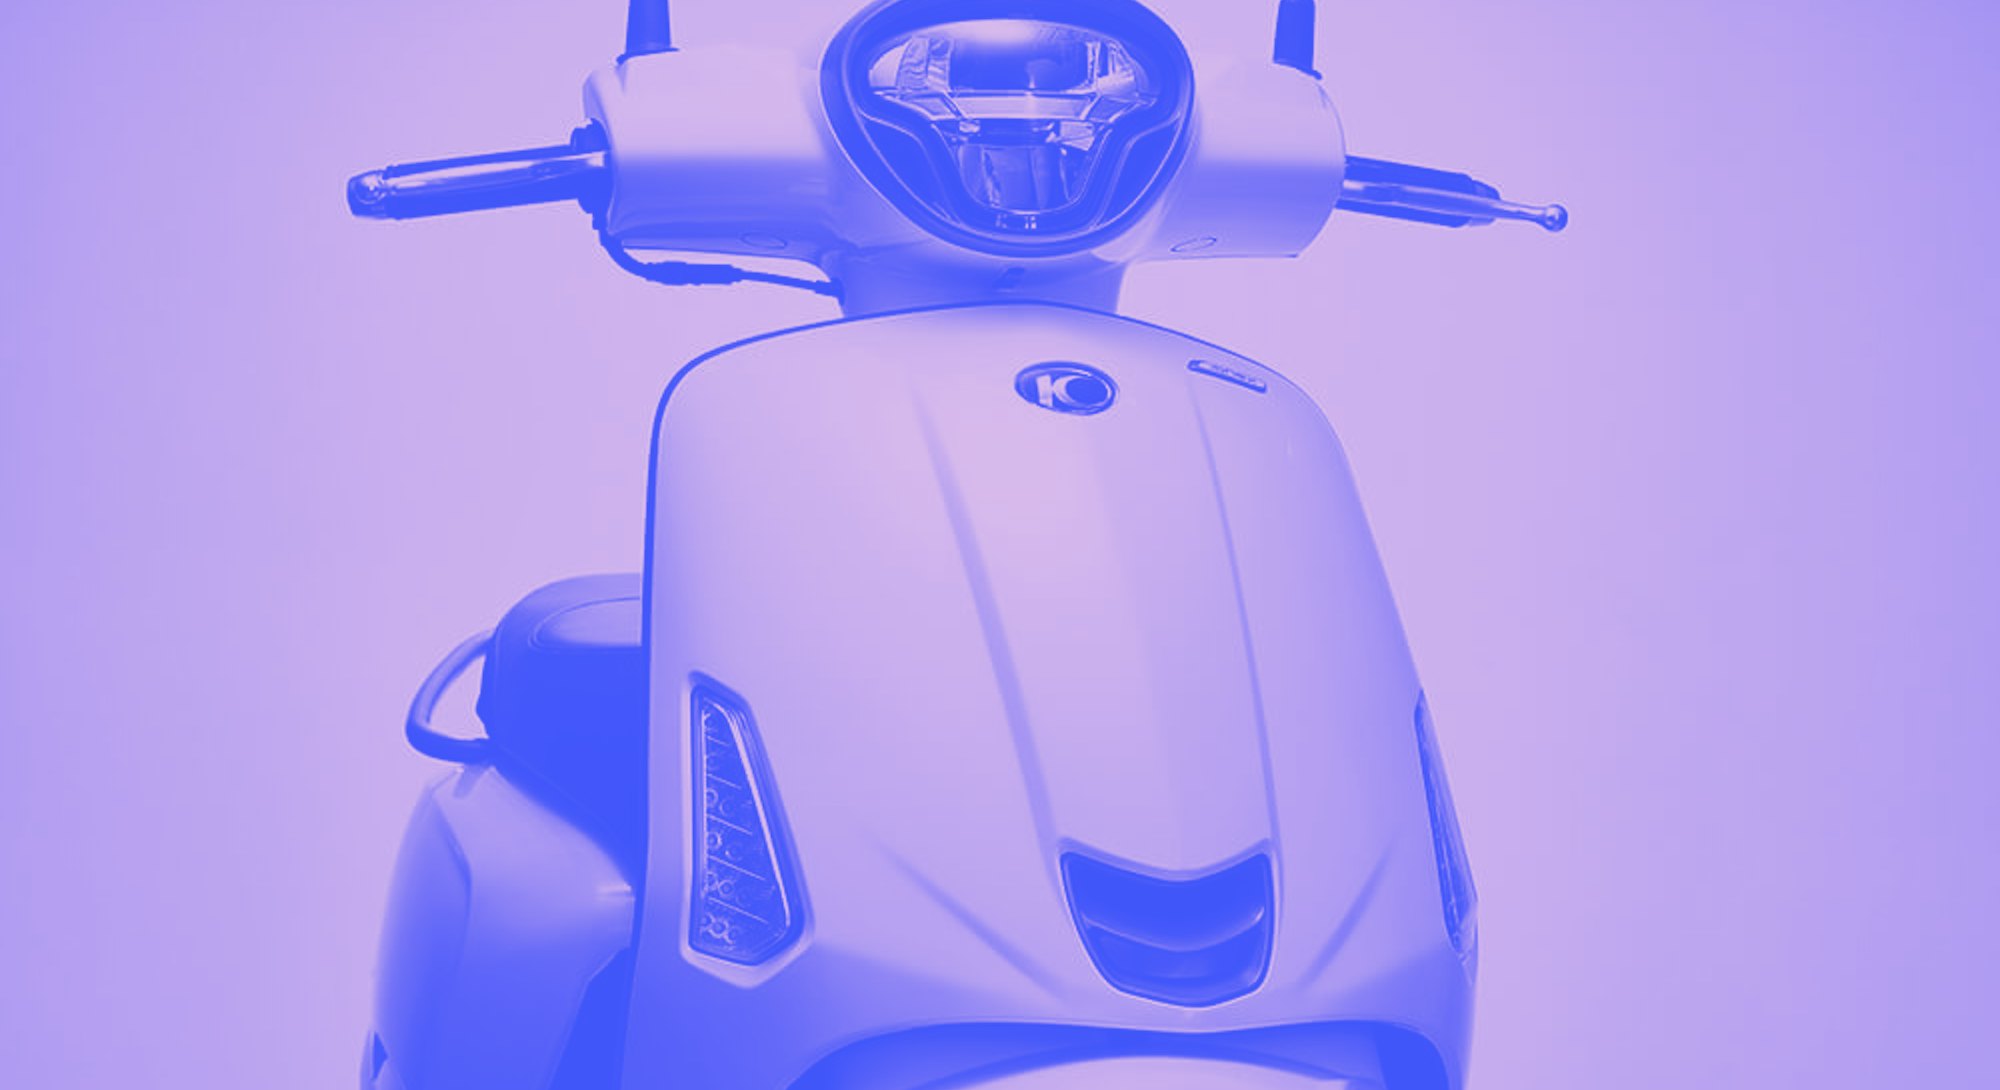 Kymco's Like 125 EV e-scooter with five modular batteries and a 125-mile range.